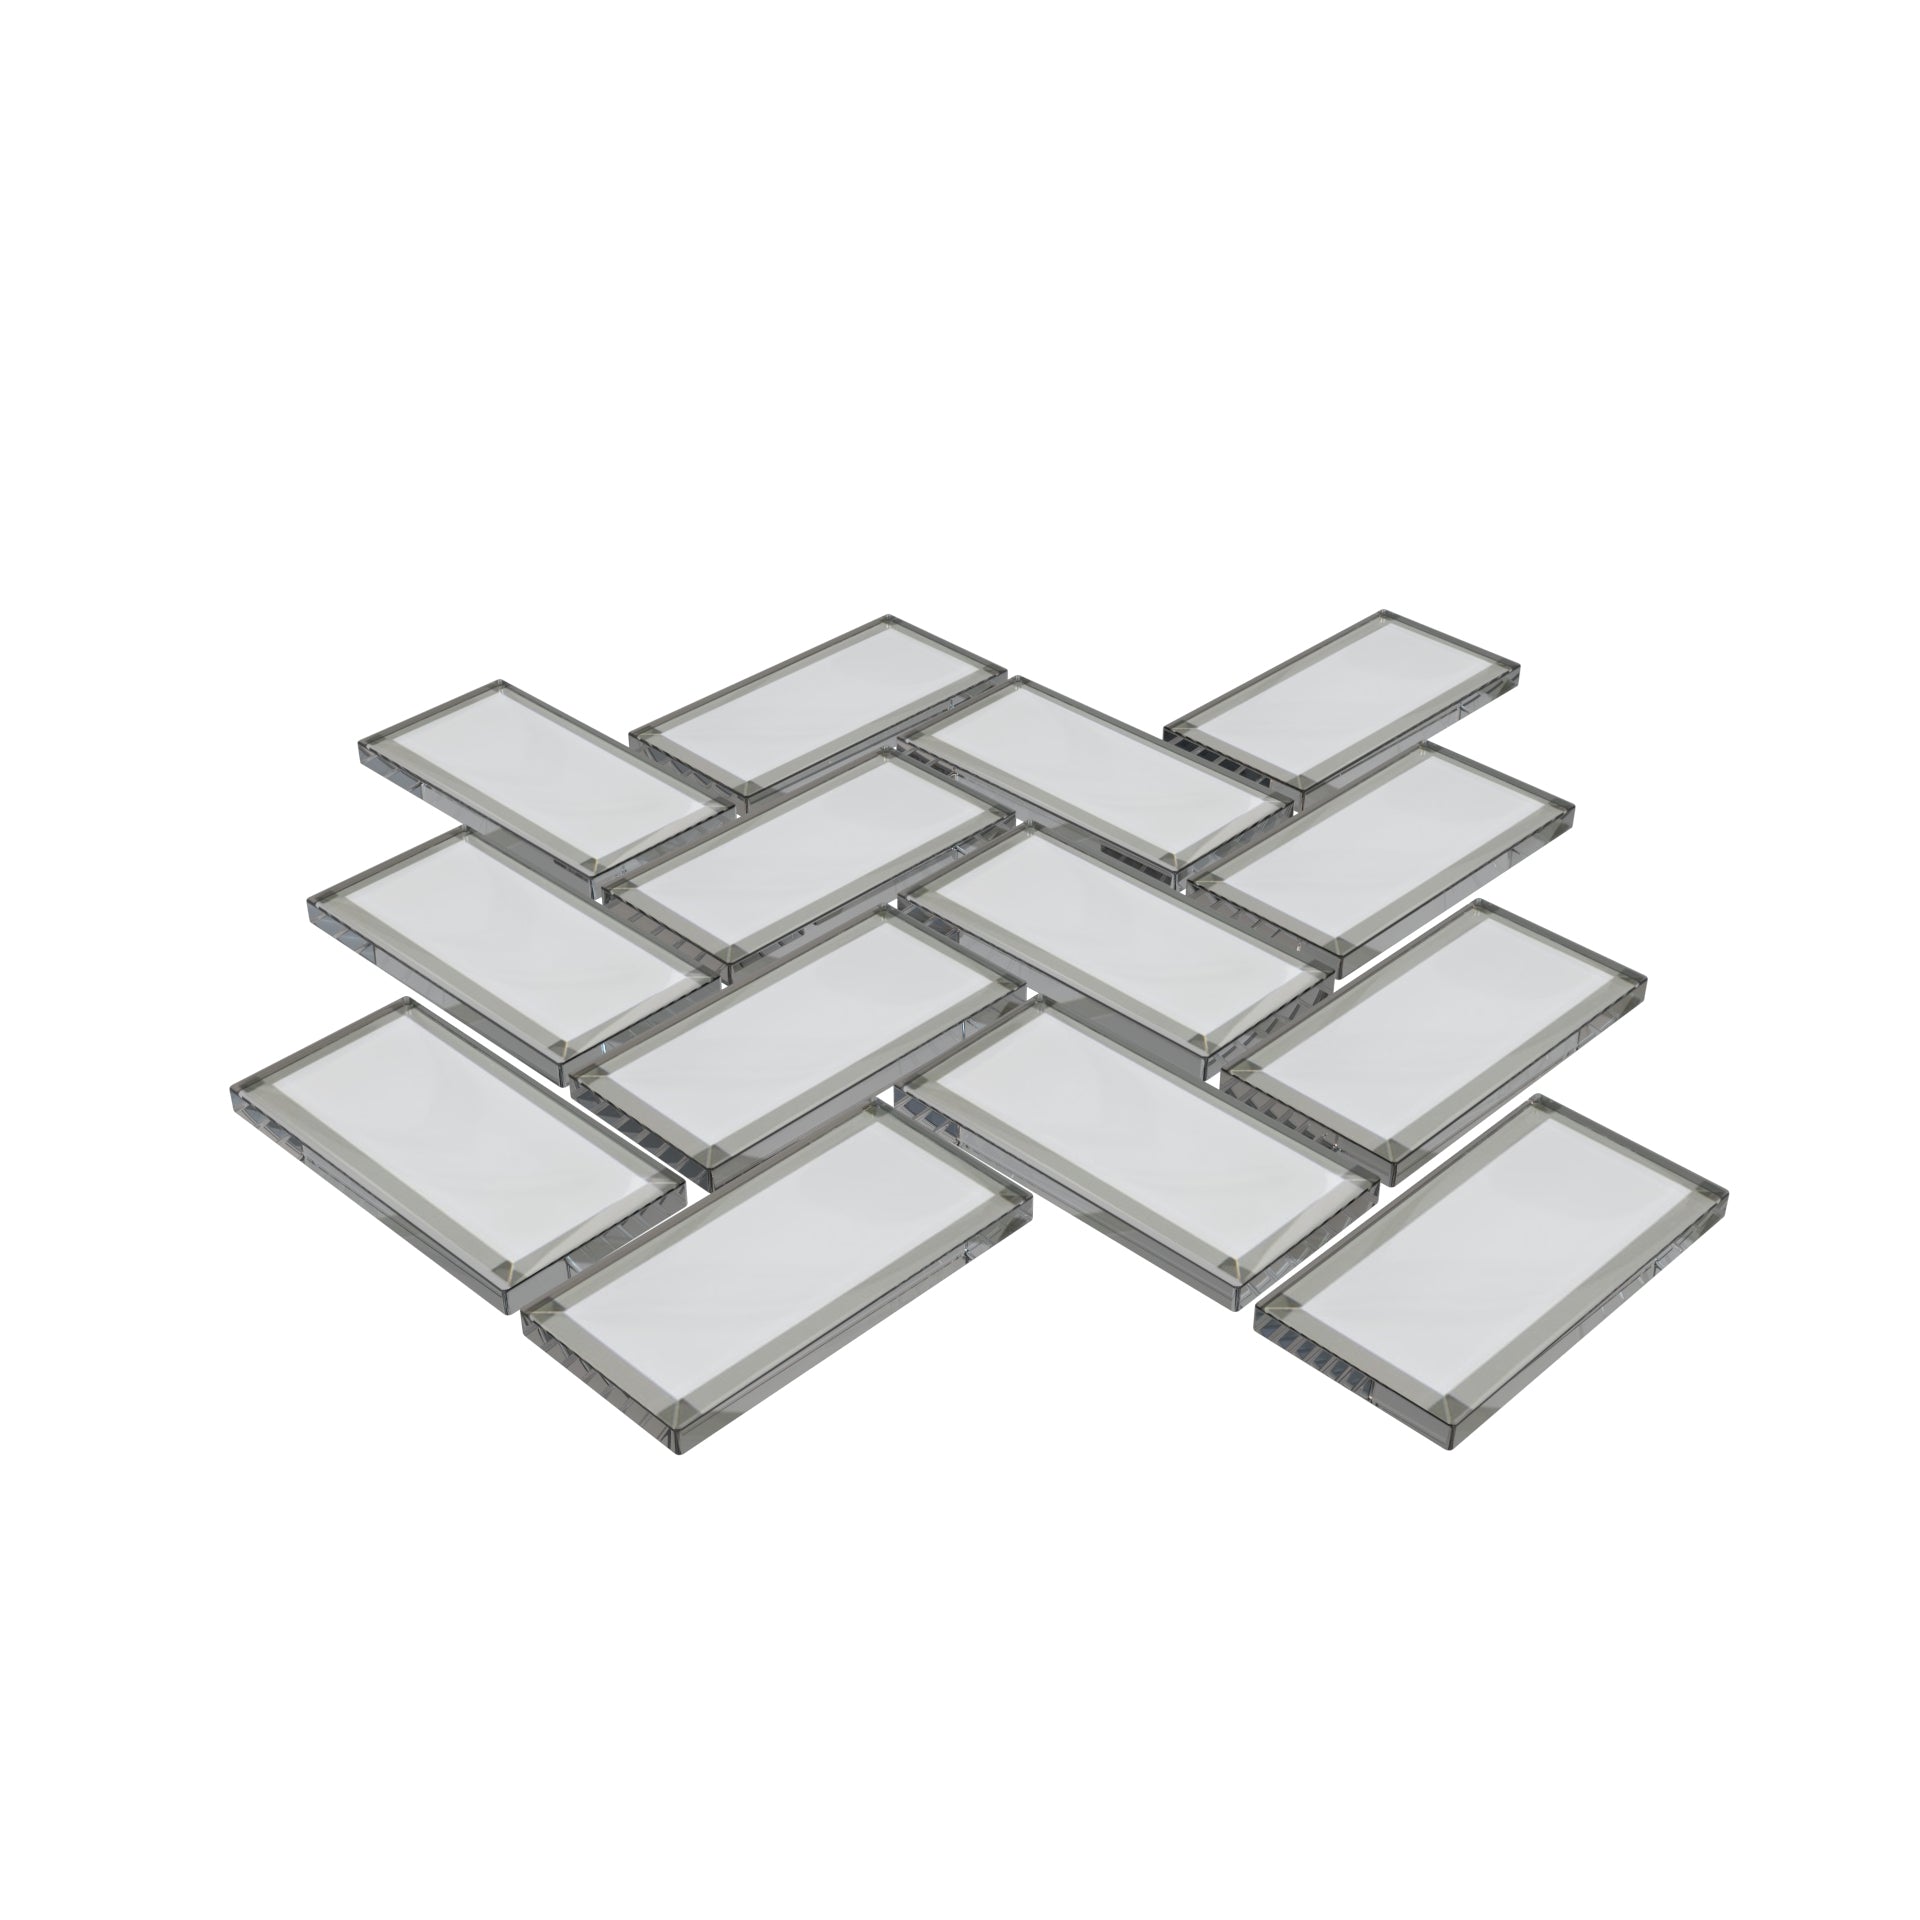 10 x 11 inch Glass Mosaic Tile with White Color and Glossy & Beveled